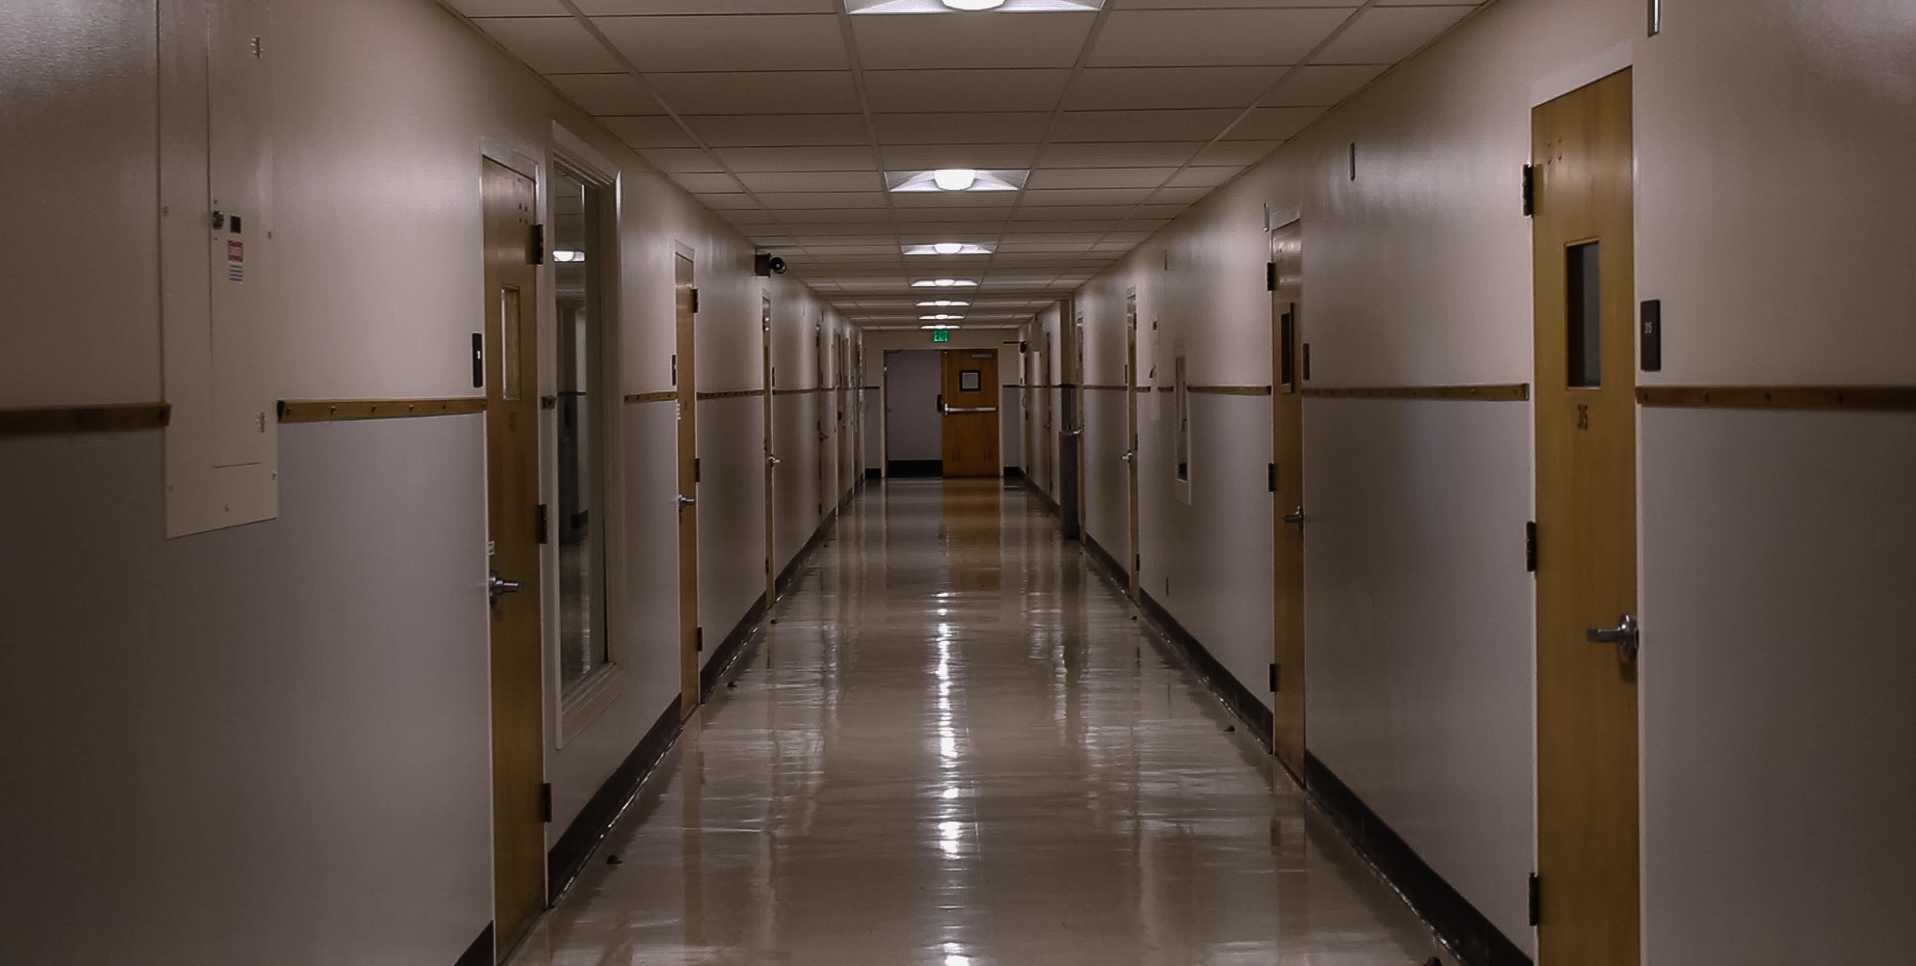 The third floor of the Family and Food Science Building contains an eerie aura. (Diego Vargas/The Collegian)